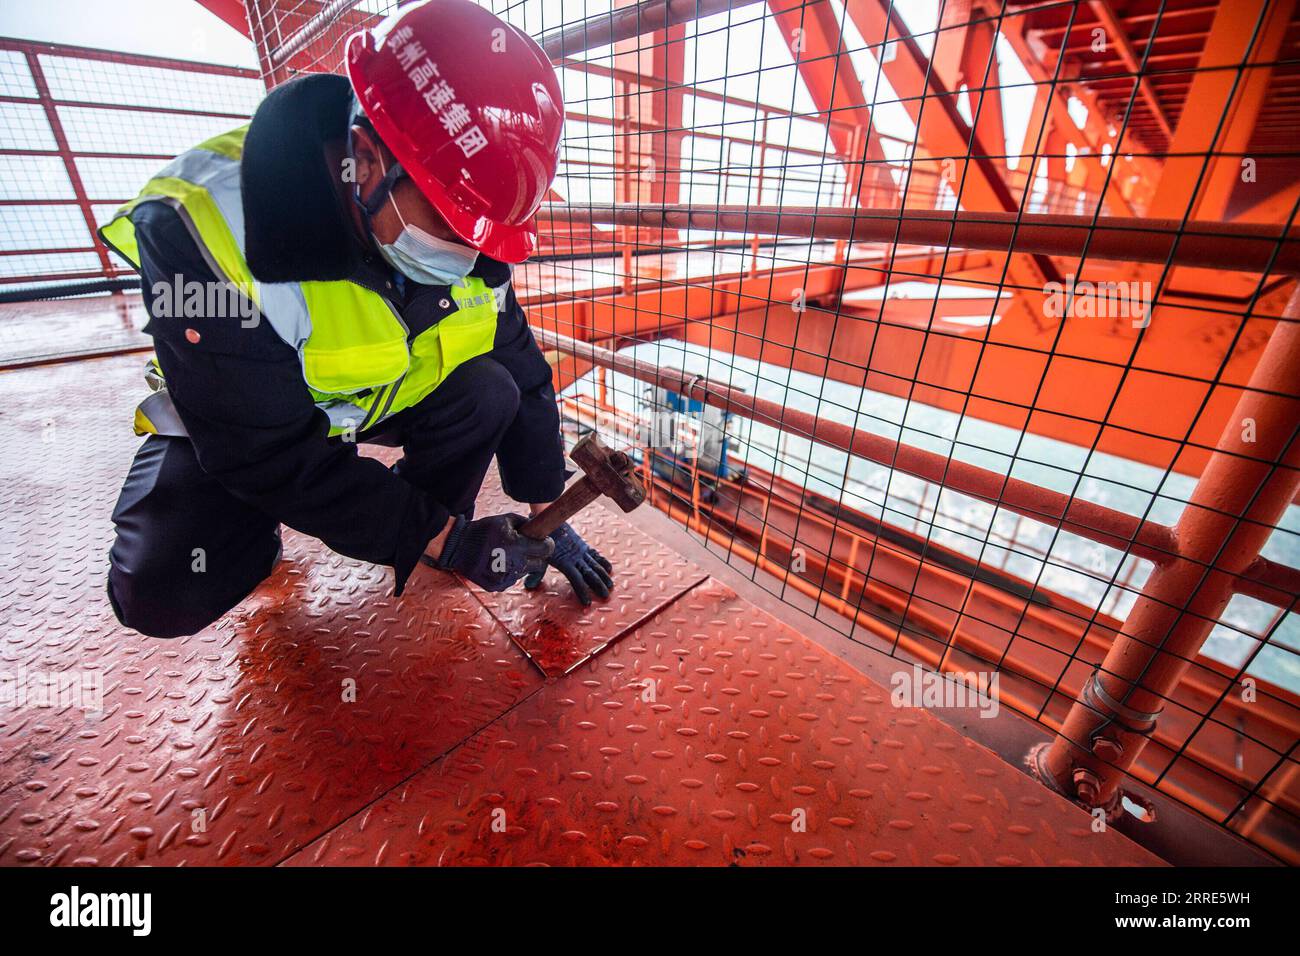 220130 -- LIUPANSHUI, Jan. 30, 2022 -- A worker carries out maintenance tasks on the Beipanjiang Bridge in southwest China s Guizhou Province, Jan. 29, 2022. Sitting over 565.4 meters above a valley, the Beipanjiang Bridge has been certified as the world s highest bridge by the Guinness World Records. Spanning 1,341.4 meters, the bridge links Duge Township of Liupanshui in southwest China s Guizhou with Puli Township of Xuanwei in southwest China s Yunnan Province.  CHINA-GUIZHOU-LIUPANSHUI-BEIPANJIANG BRIDGE-MAINTENANCECN TaoxLiang PUBLICATIONxNOTxINxCHN Stock Photo